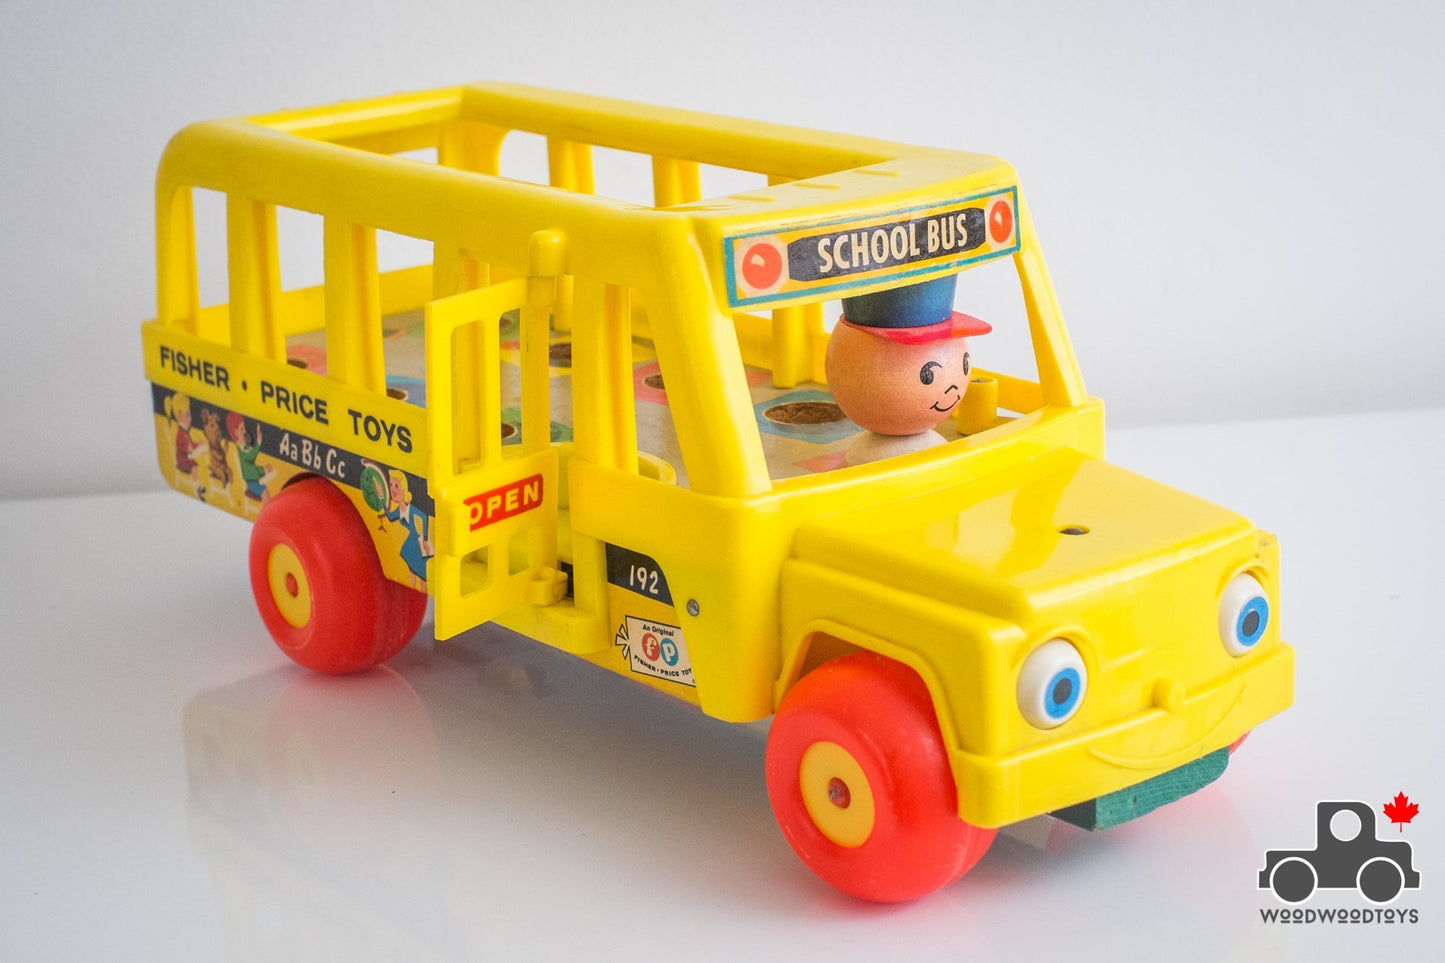 Vintage Fisher Price School Bus #192 - Wood Wood Toys Canada's Favourite Montessori Toy Store